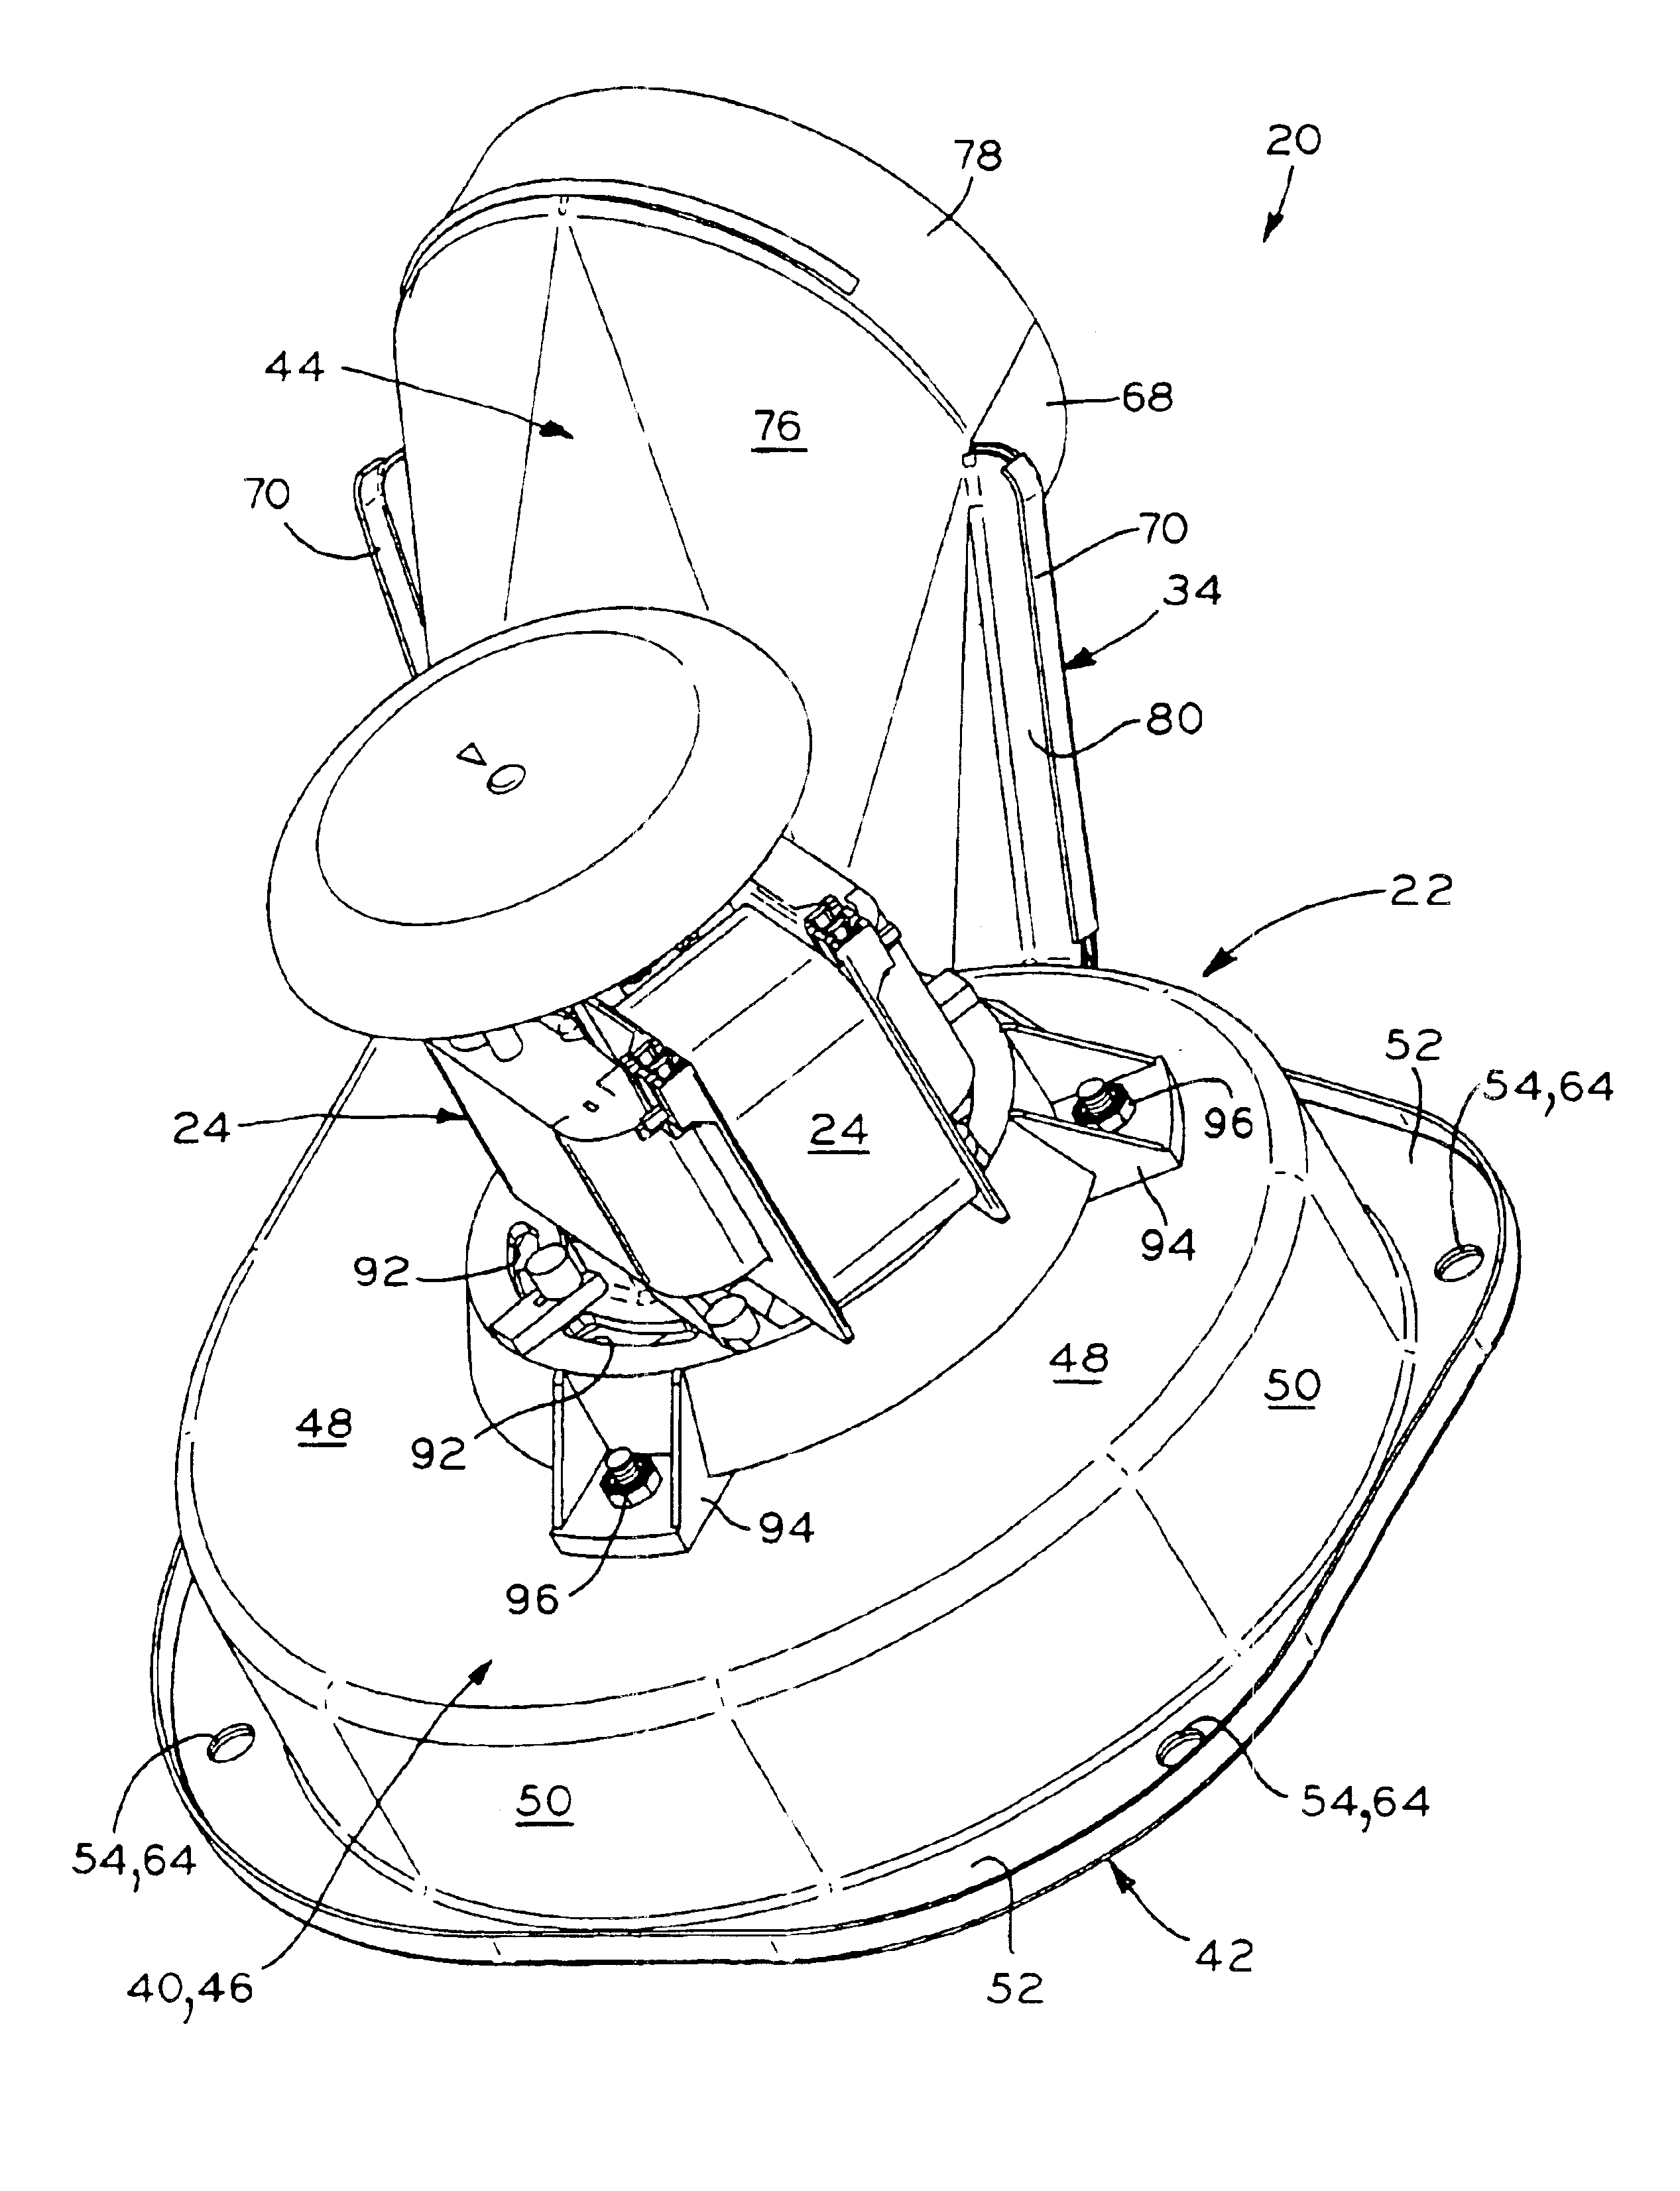 Blower housing for furnace blower assembly